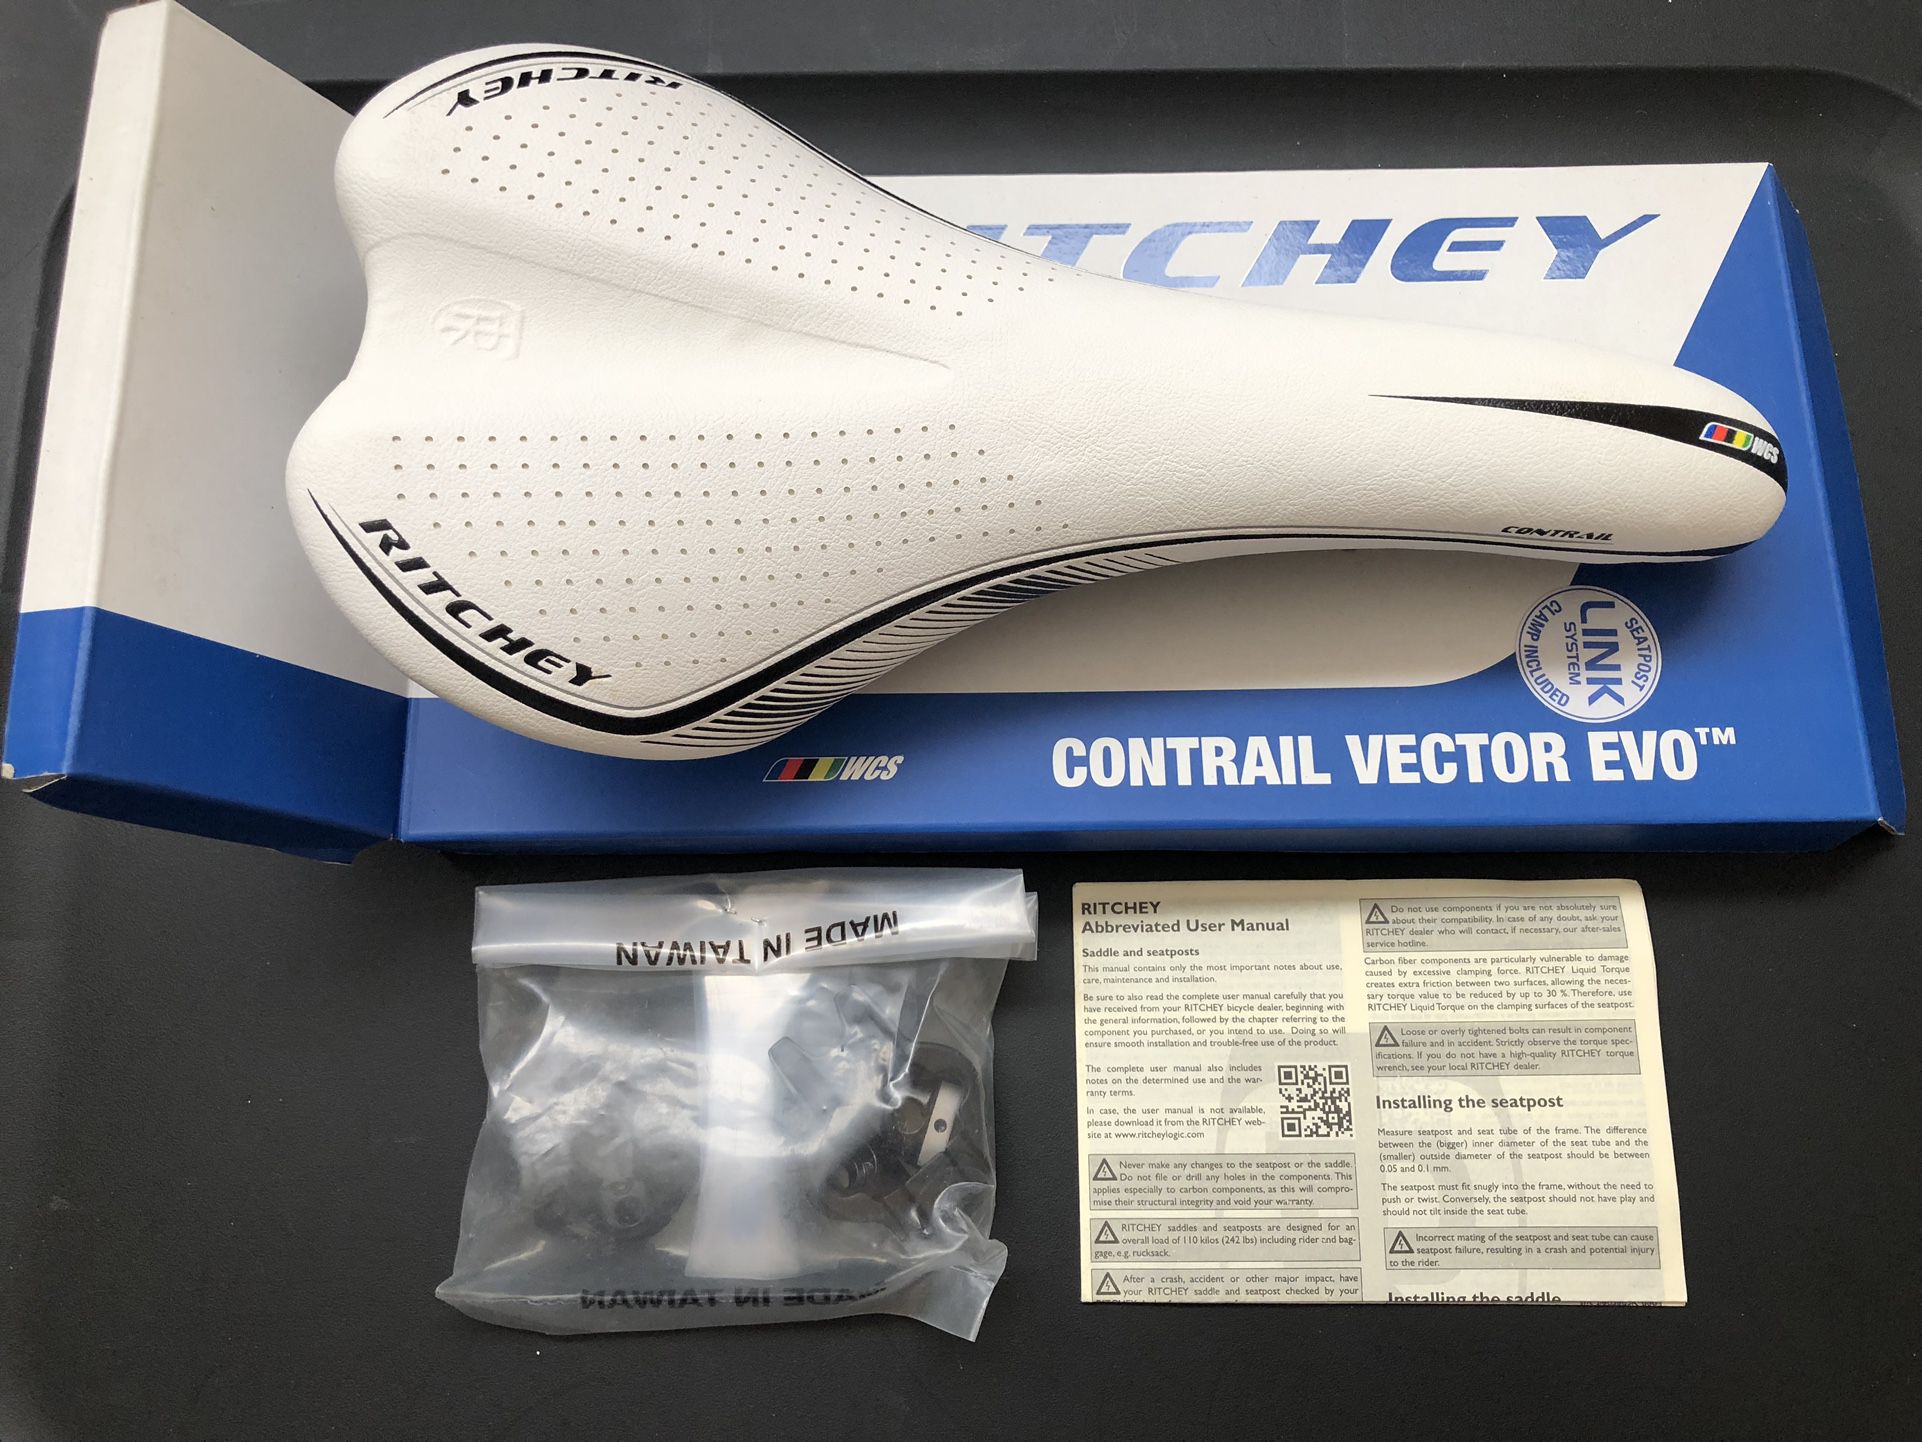 New Ritchey Contrail Vector Evo Carbon Bike Saddle In New Condition Bike Seat.  $40 firm  The key to the system is the patented Vector Evo rail